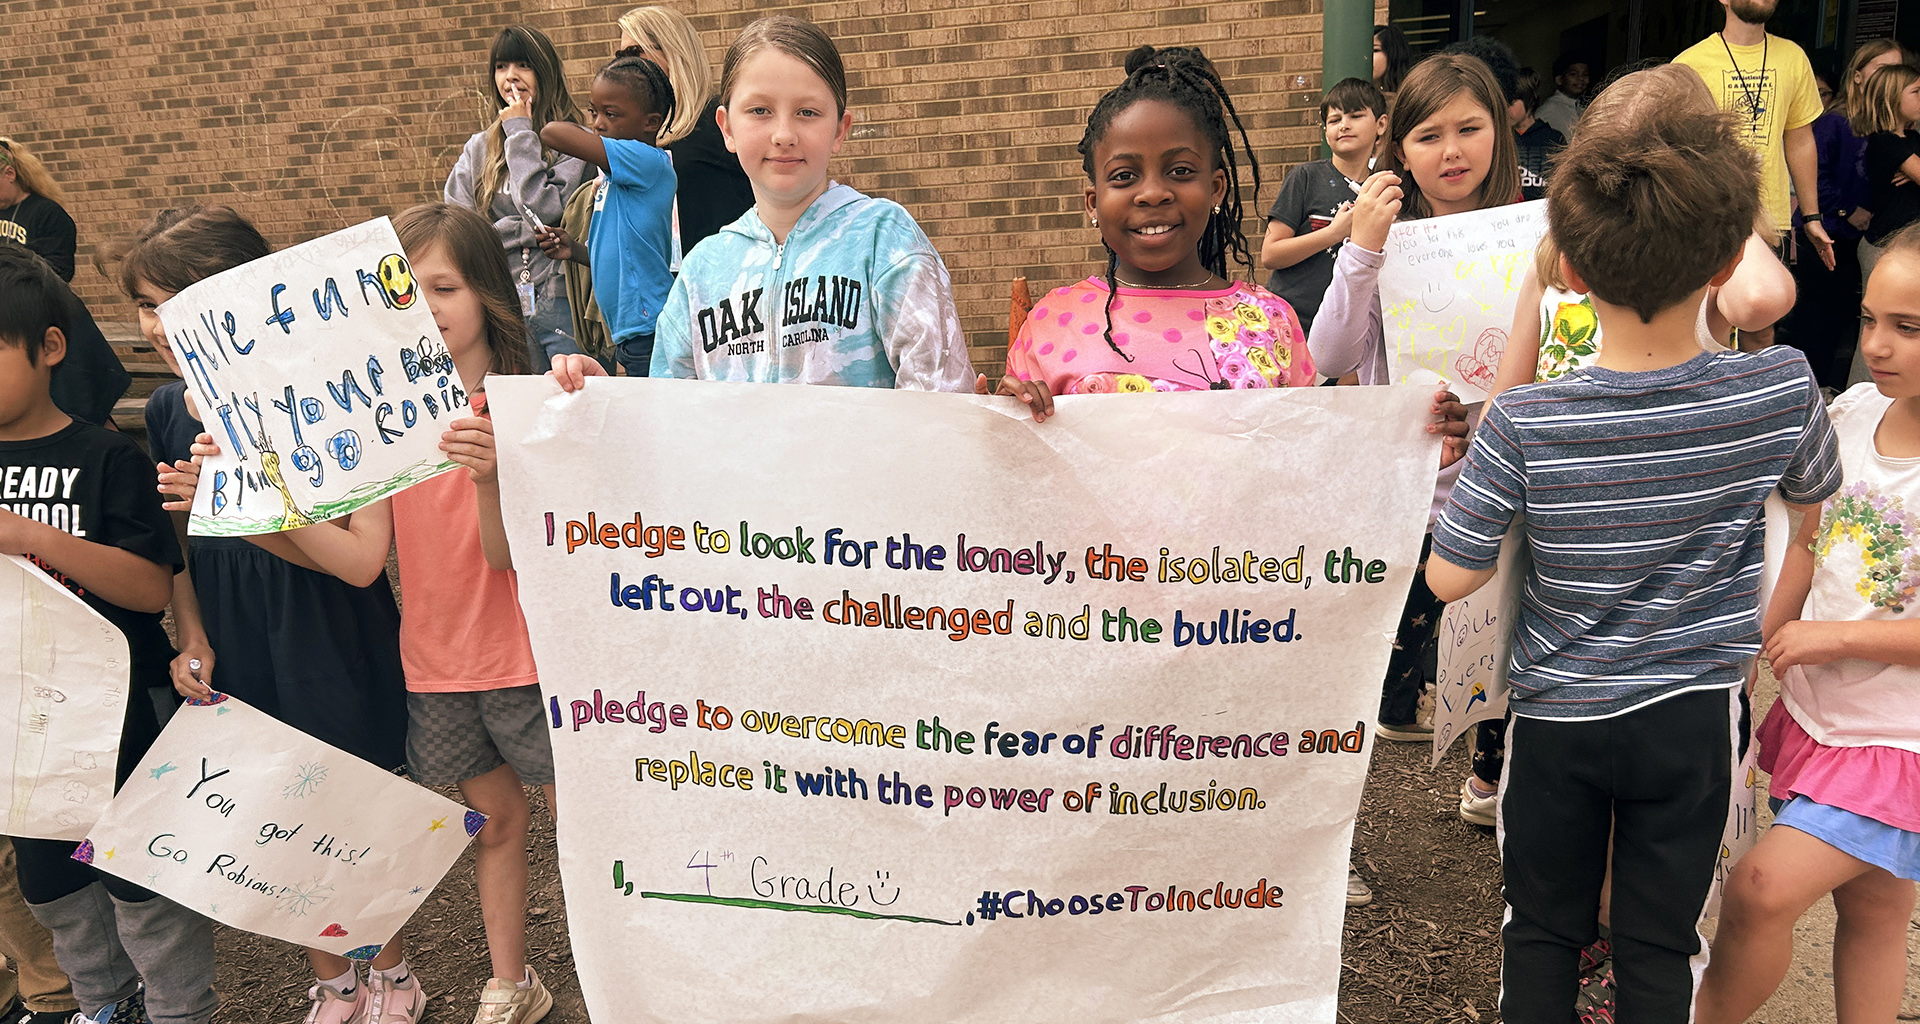 Students outside holding up signs that pledge to be kind